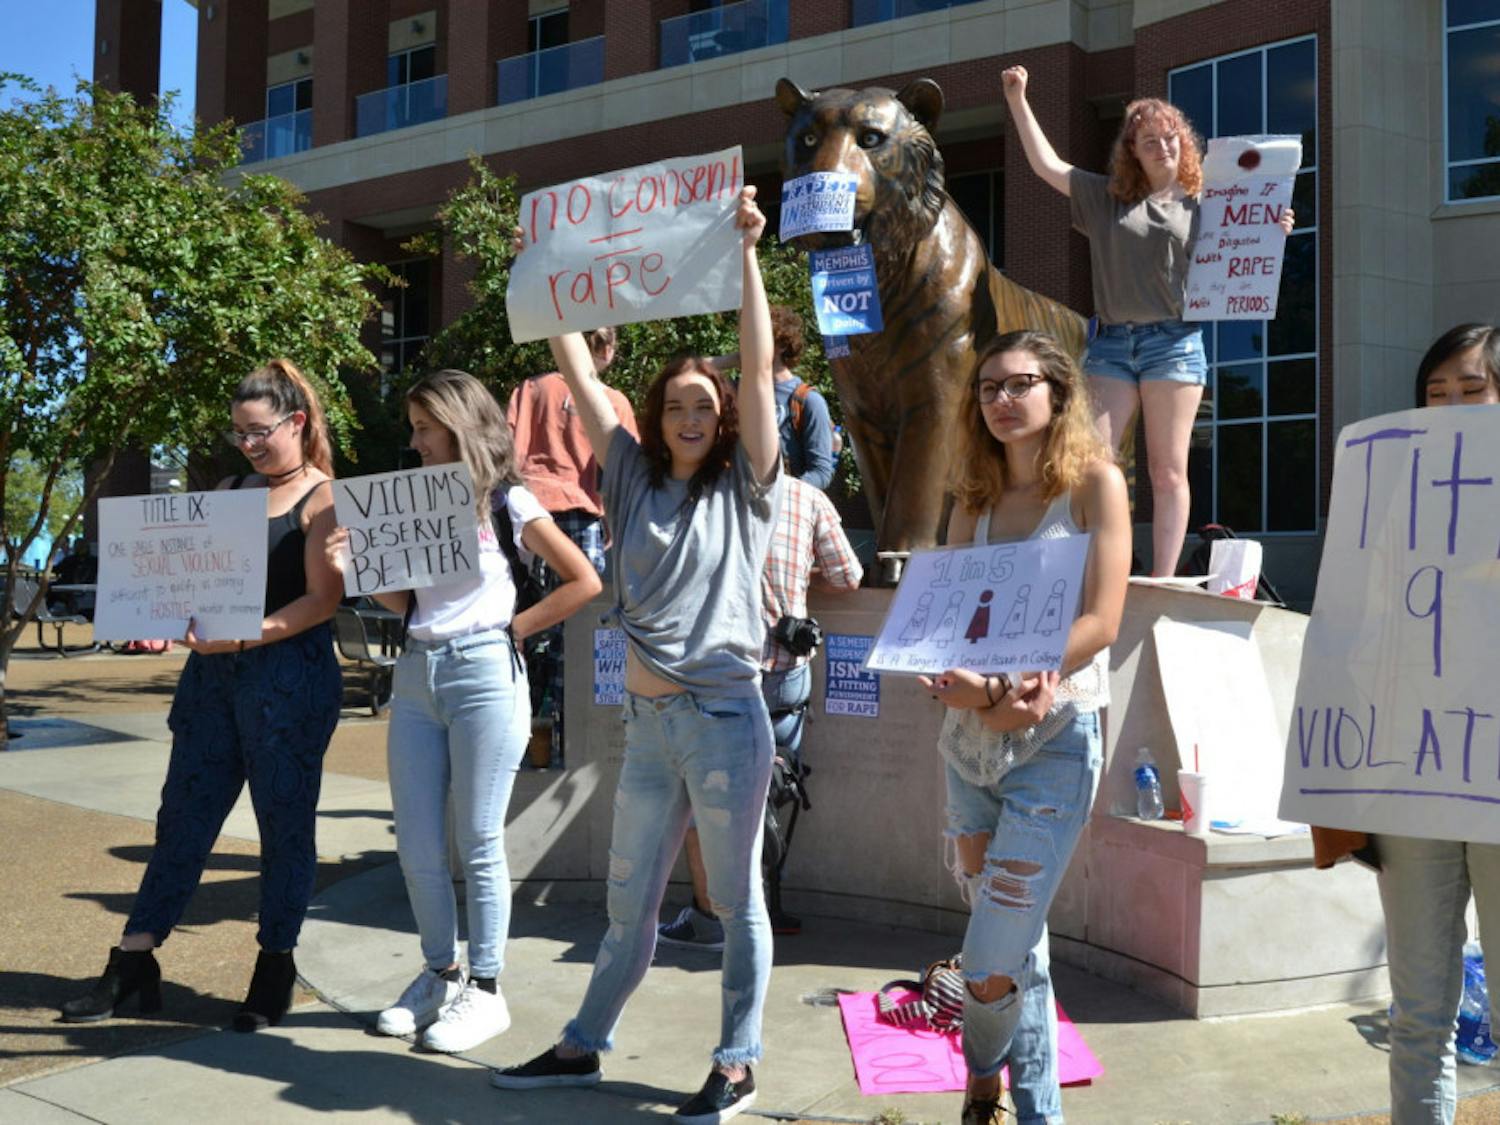 Sexual assault protest continues at Tom the Tiger statue